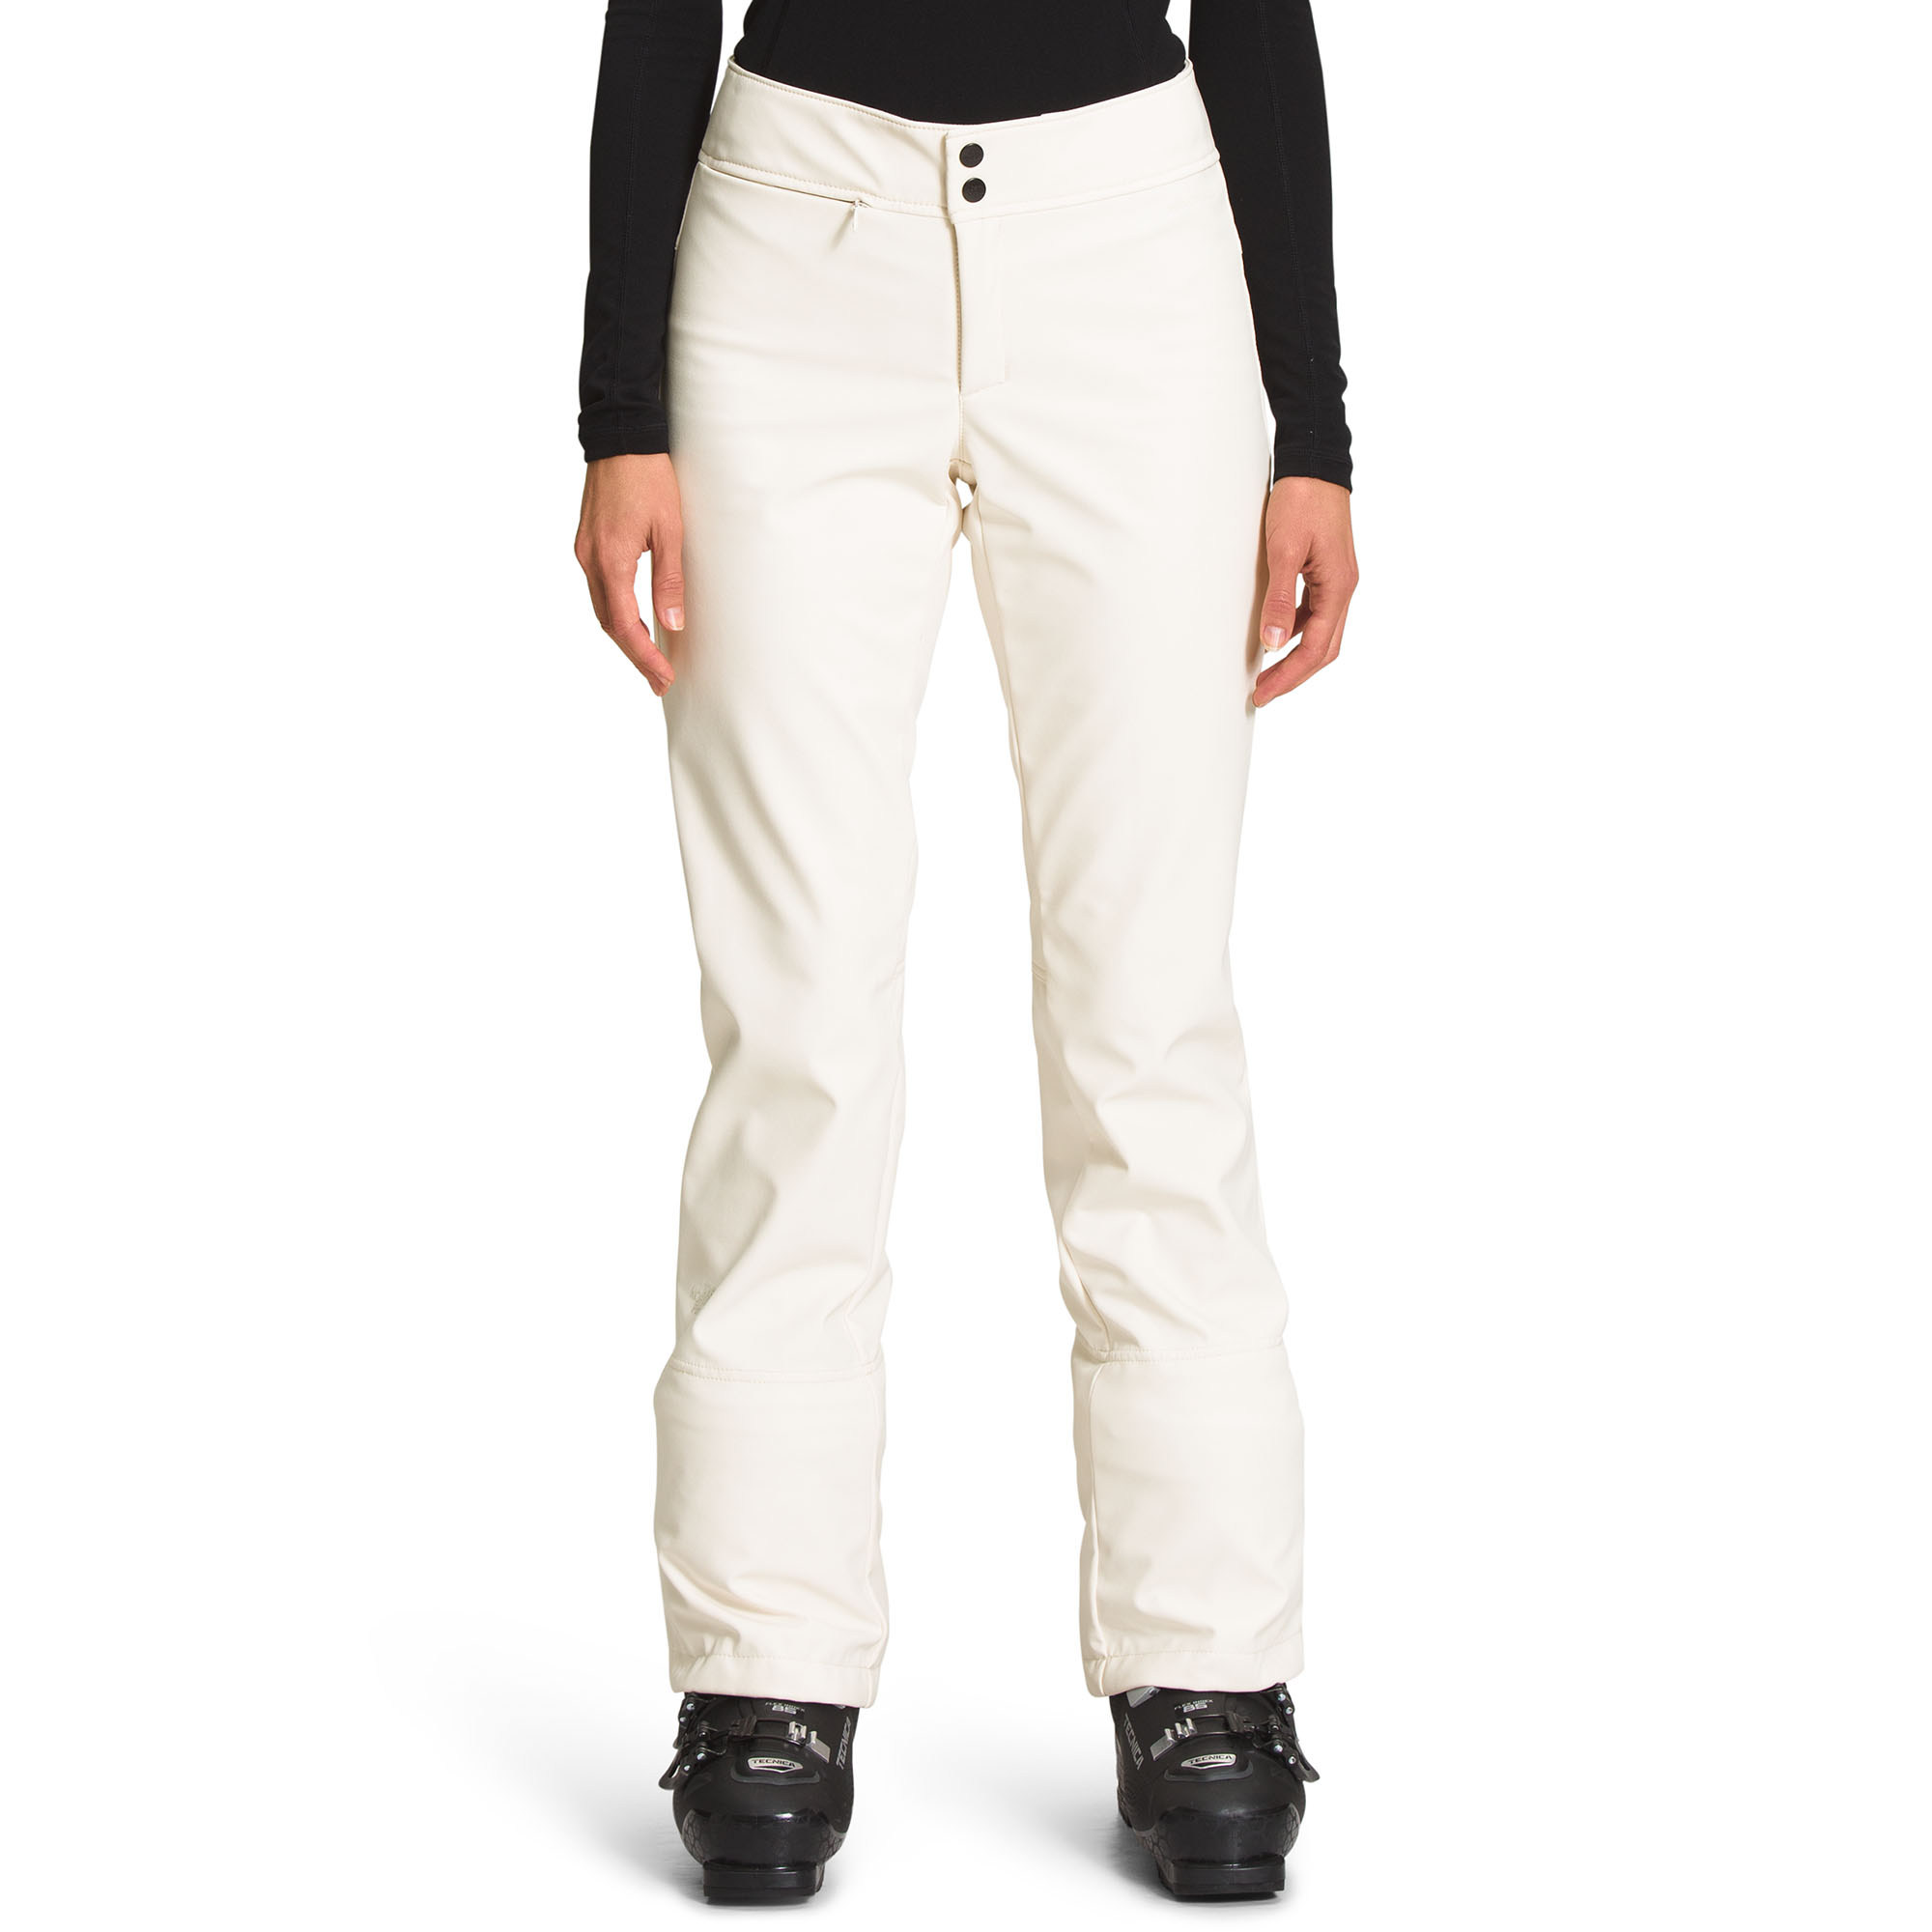 THE NORTH FACE Women's Apex STH Snow Pant, Gardenia White, Small - GENTLY  USED